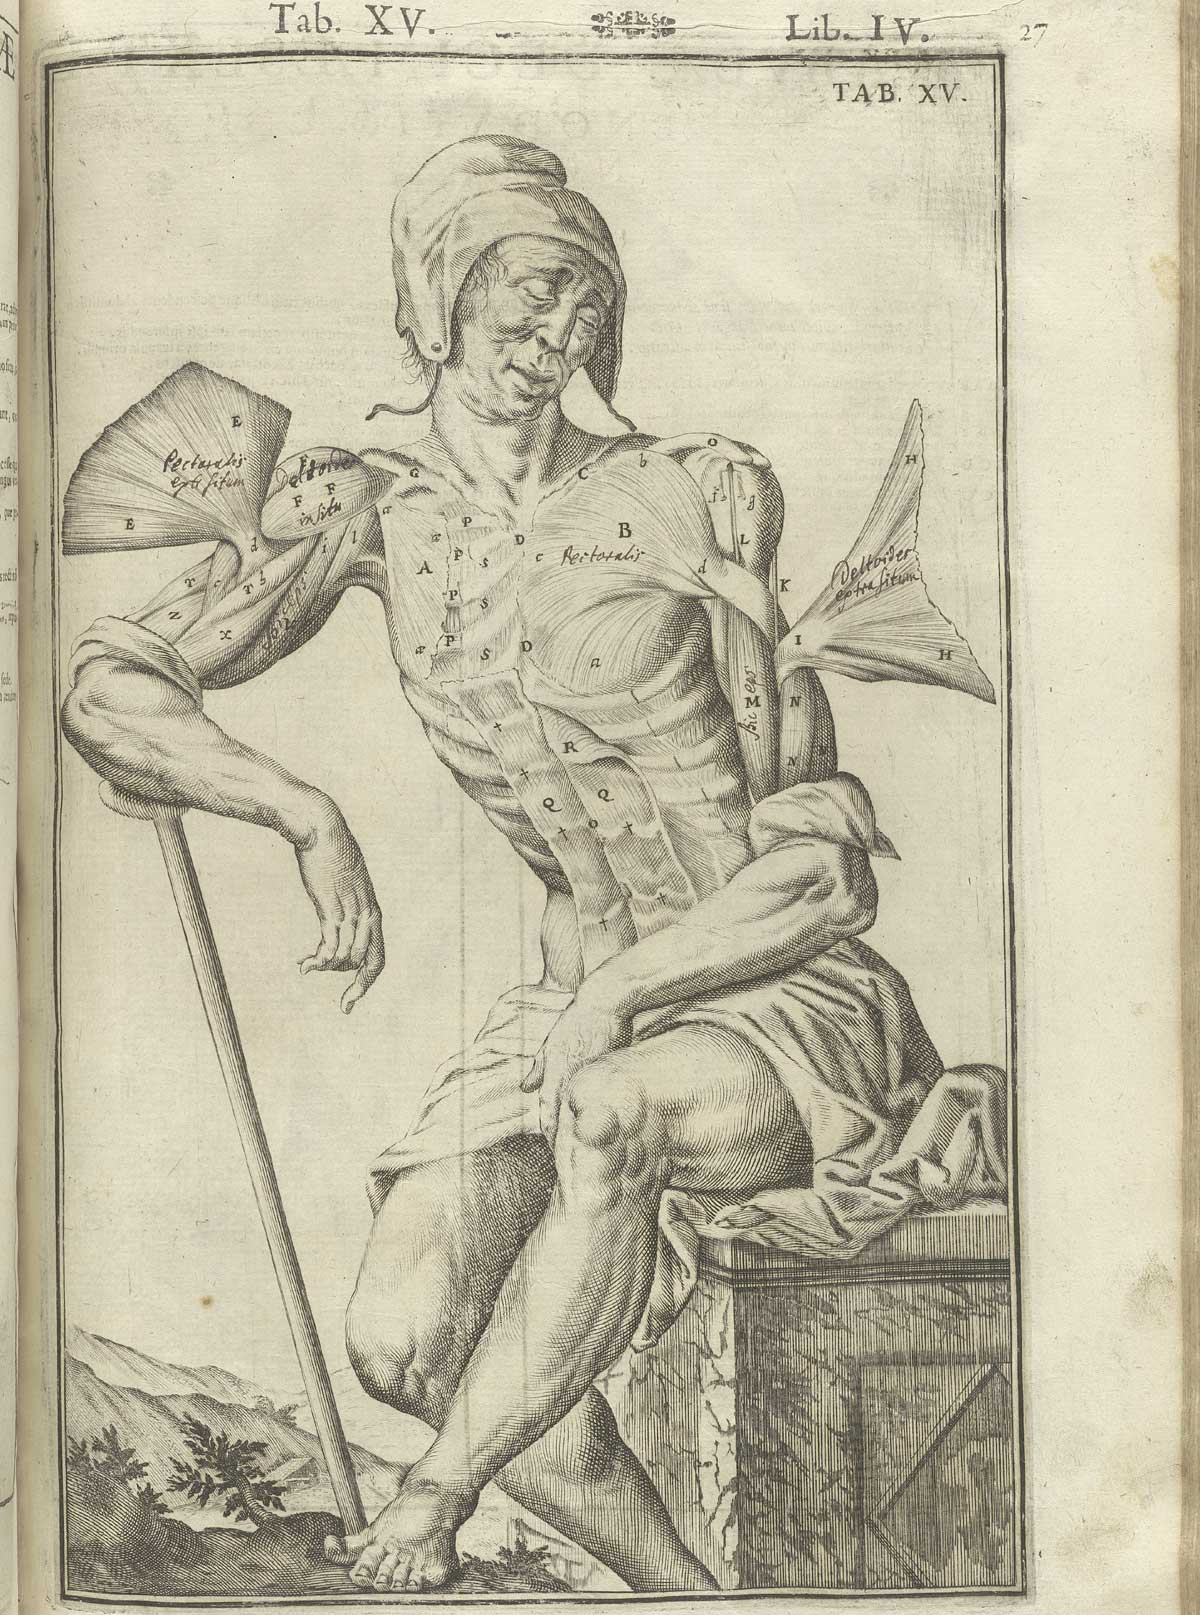 Engraving showing a facing nude male anatomical figure wearing a kerchief  in a pastoral setting sitting on stone pediment leaning on a cane with his right arm, with his right deltoid and left pectoral muscles outstretched to resemble wings, with the rest of his skin pulled away from his torso and abdomen revealing other musculature; from Adriaan van de Spiegel and Giulio Cassieri’s De humani corporis fabrica libri decem, Venice, 1627, NLM call no. WZ 250 S755dh 1627.